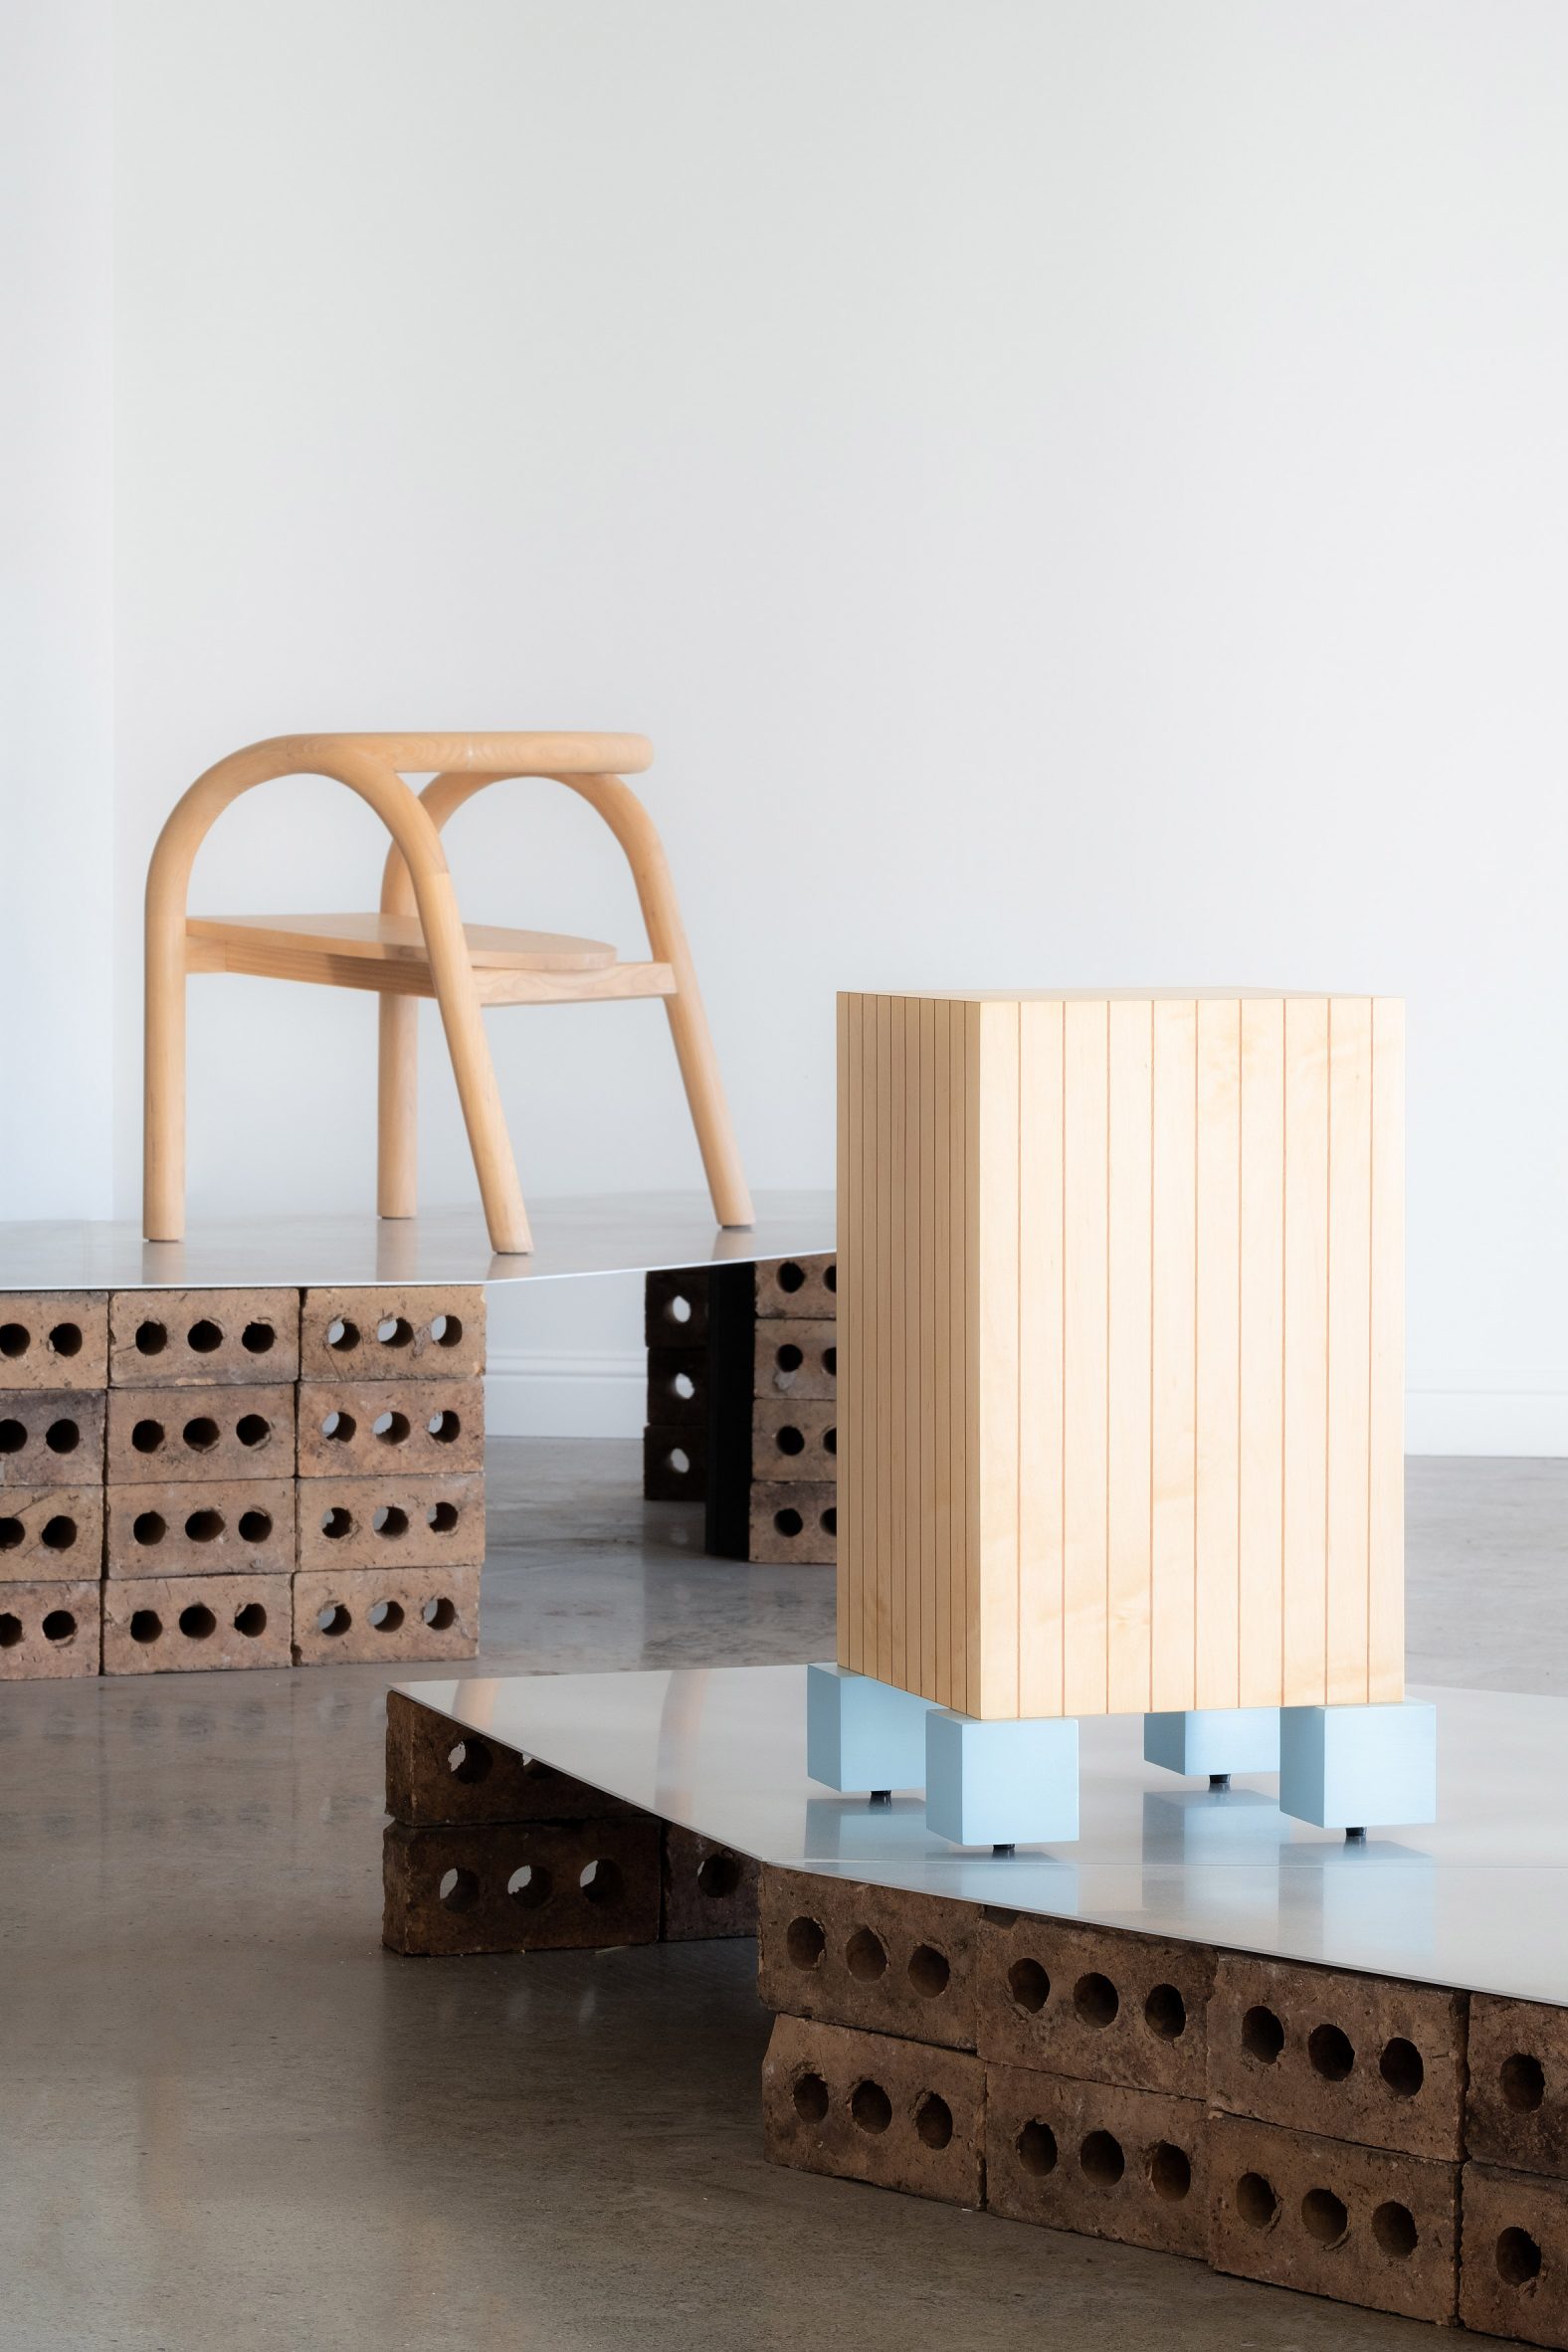 Wooden stool and chair